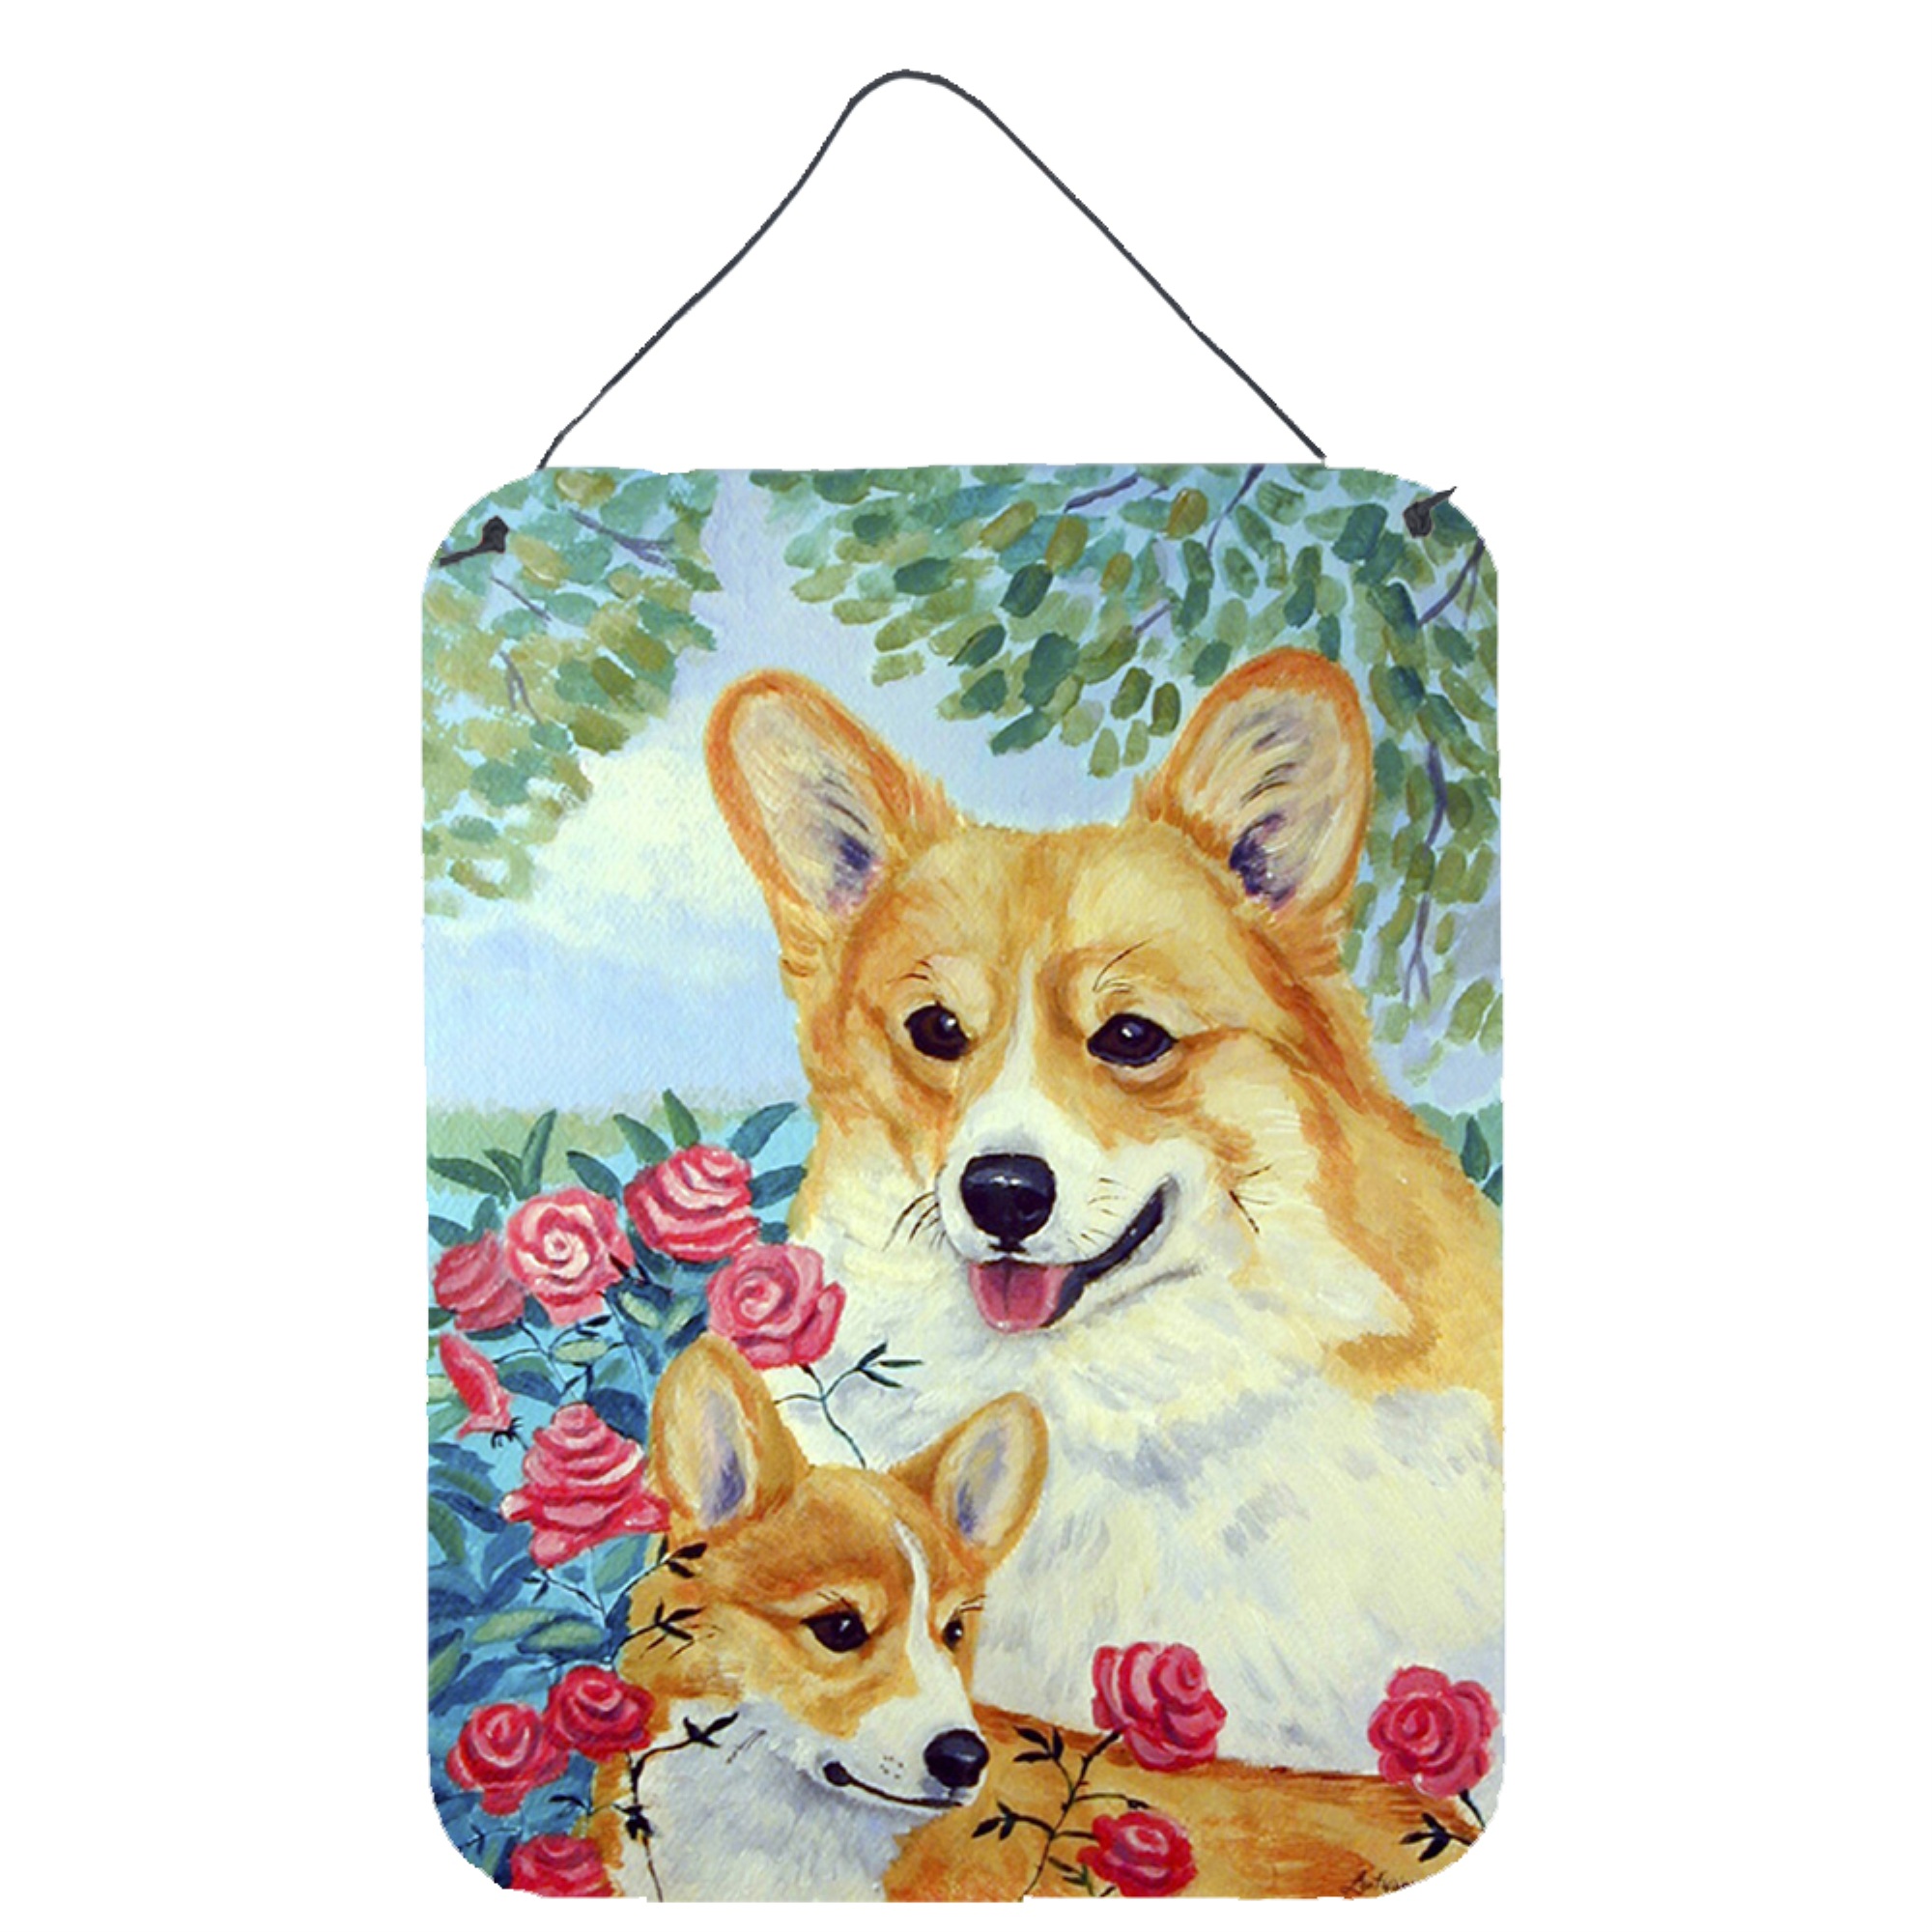 Caroline's Treasures "Caroline's Treasures Corgi Momma's Love and Roses Aluminium Metal Wall or Door Hanging Prints, 16"" x 12"", Multicolor"